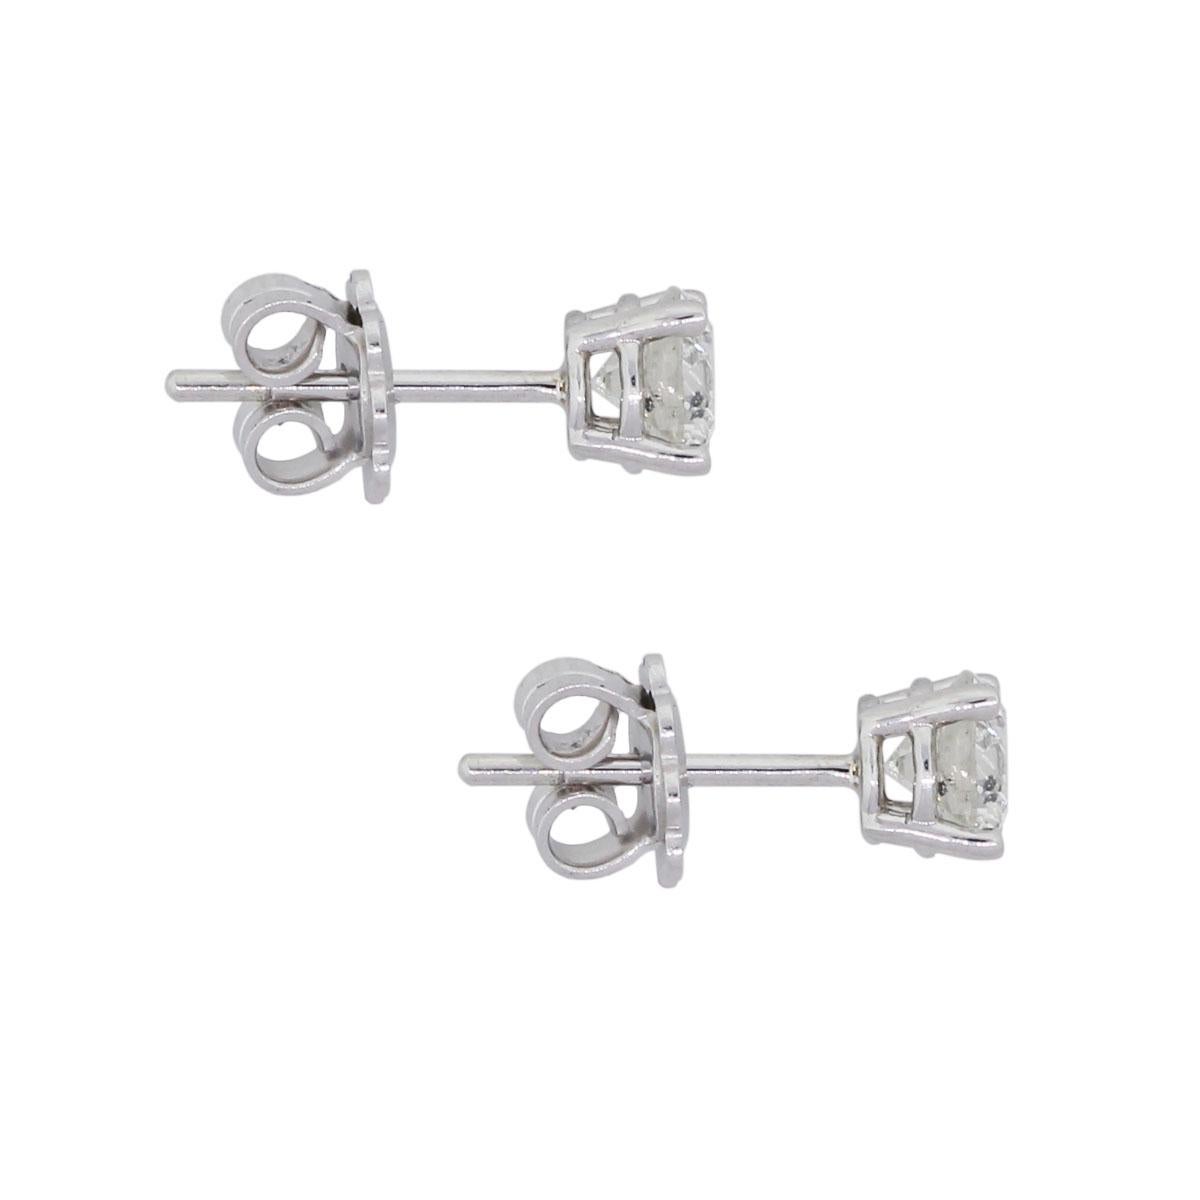 Material: 14k white gold
Diamond Details: Approximately 1.41ctw of round brilliant diamonds. Diamonds are G/H in color and SI3 in clarity.
Measurements: 0.60″ x 0.22″ x 0.22″
Earring Backs: Post friction
Total Weight :2.1g (1.4dwt)
Additional